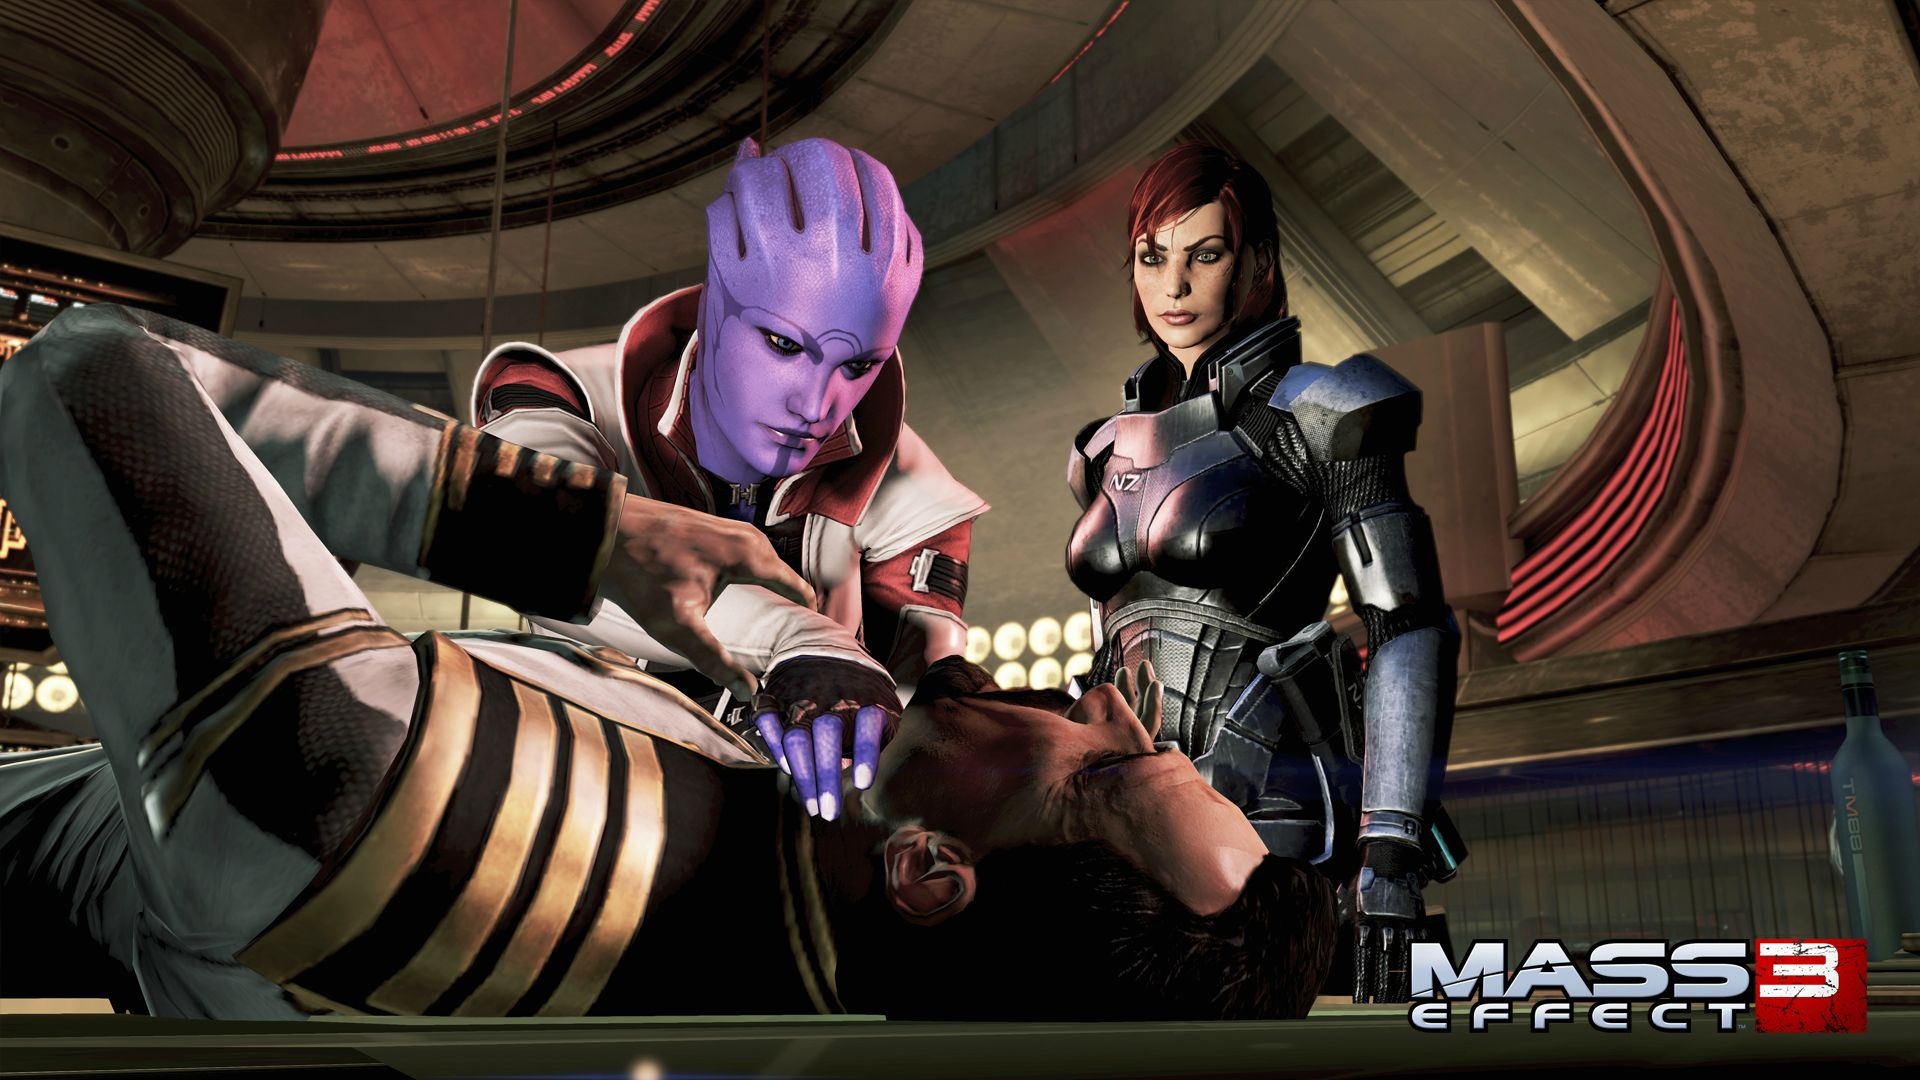 Mass Effect 3: Omega gaming, New weapons characters, Enemies, DLC expansion, 1920x1080 Full HD Desktop